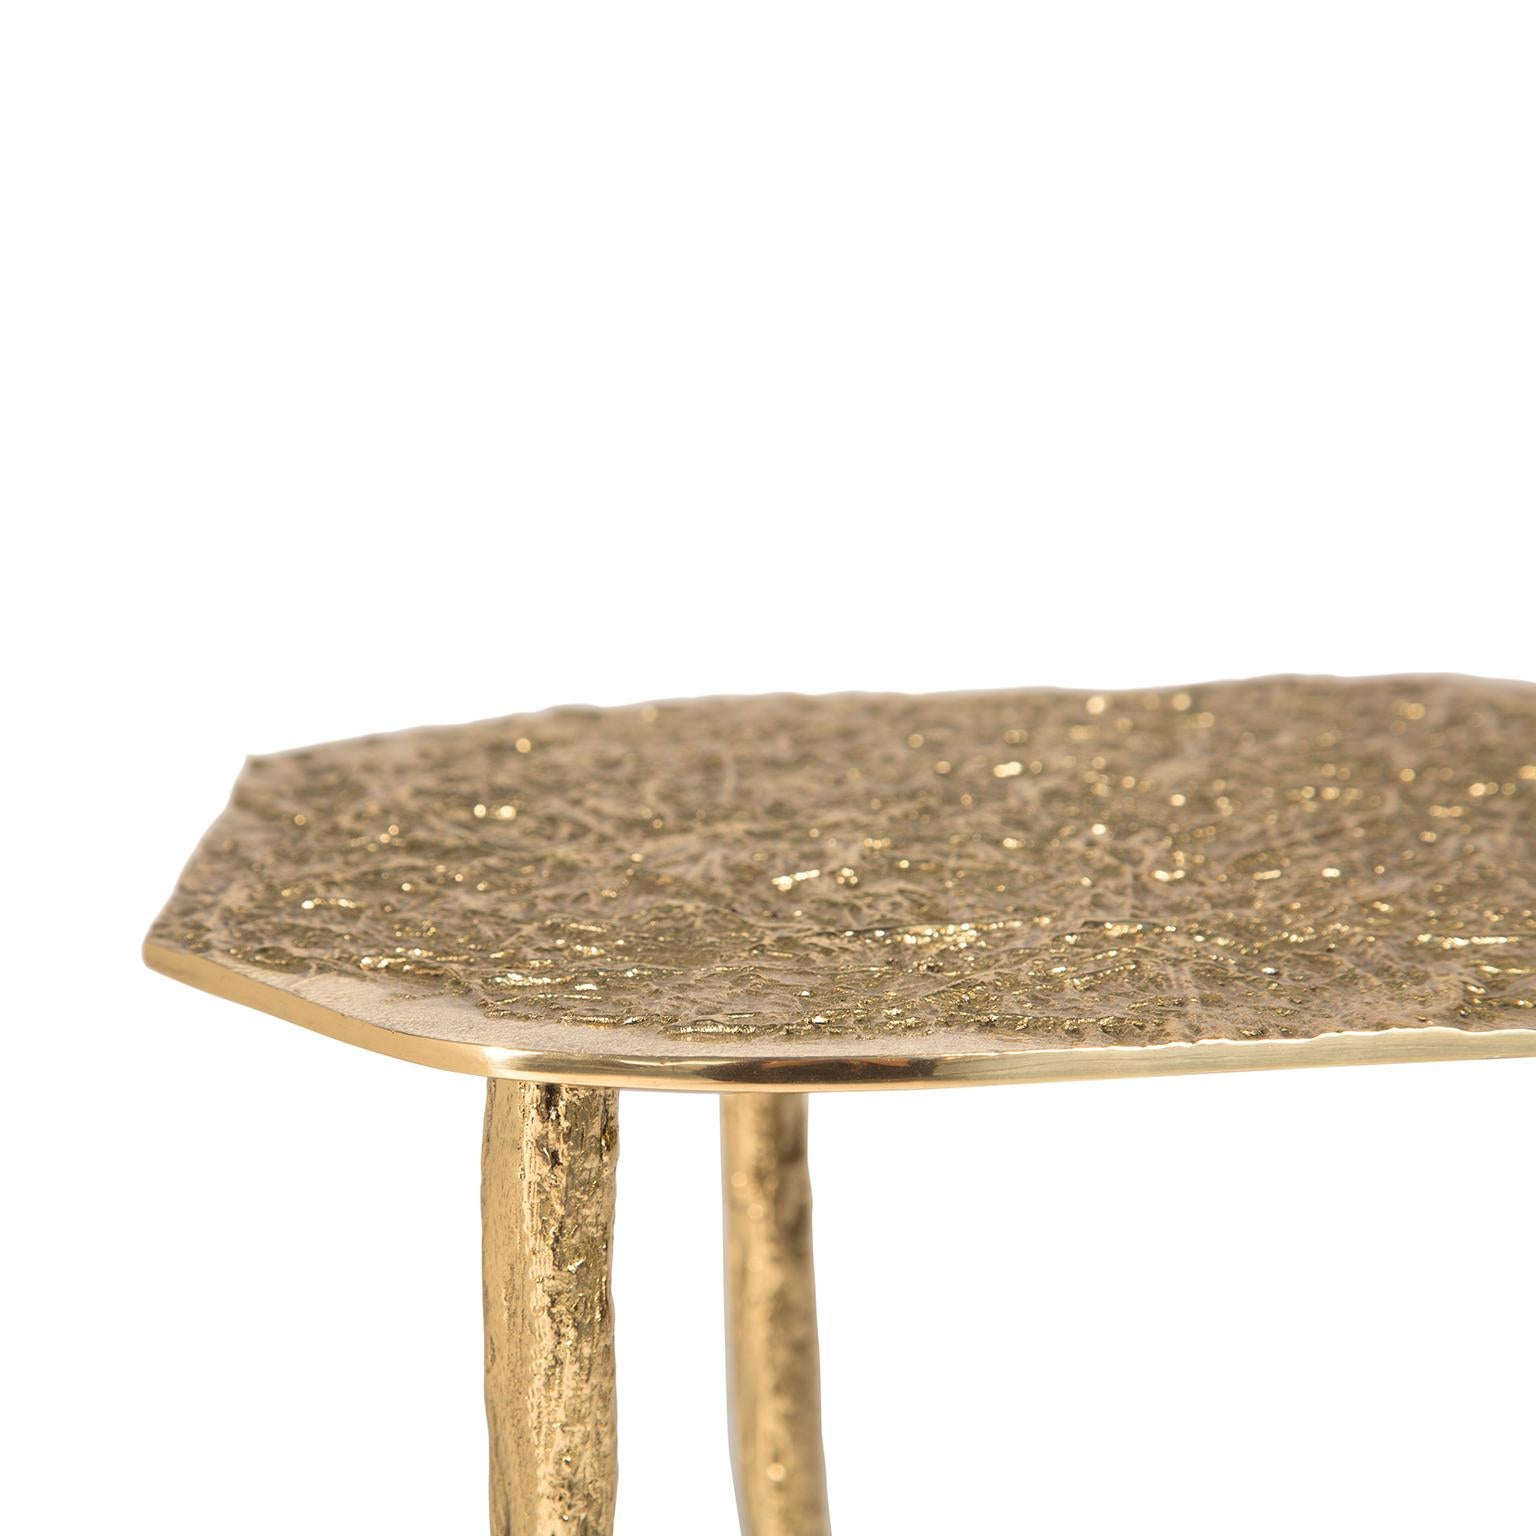 Modern Art Gallery Country Side Table in Polished Brass Cast, Inspired by Nature In New Condition For Sale In Oporto, PT